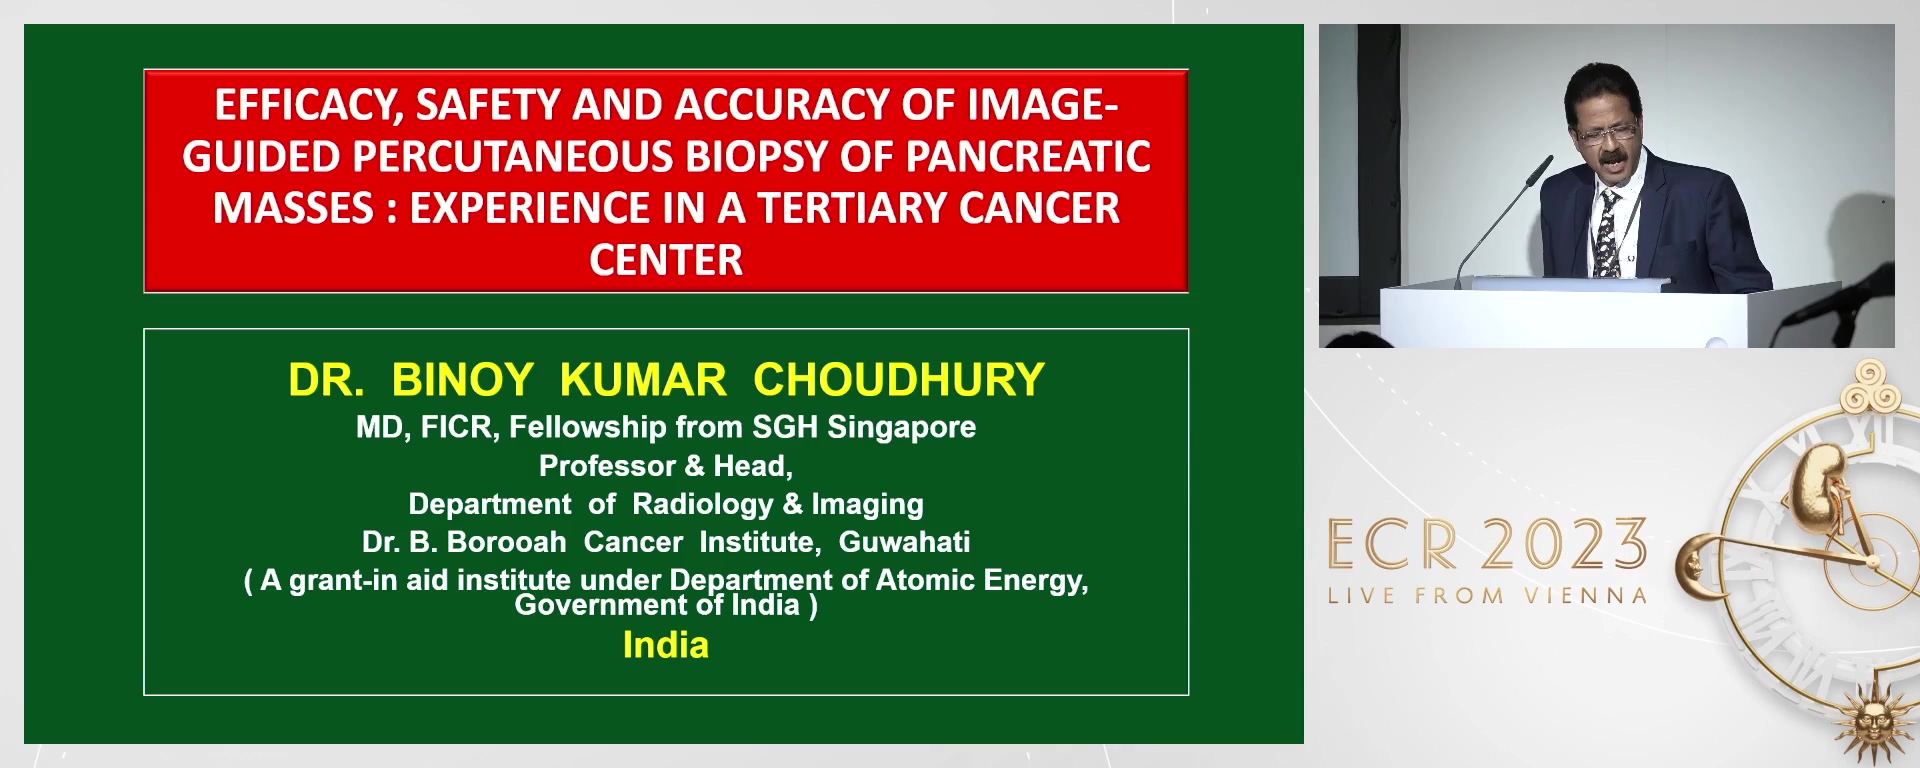 Efficacy, safety and accuracy of Image-guided percutaneous biopsy of pancreatic masses: experience in a tertiary cancer centre - Binoy Kumar Choudhury, Guwahati / IN